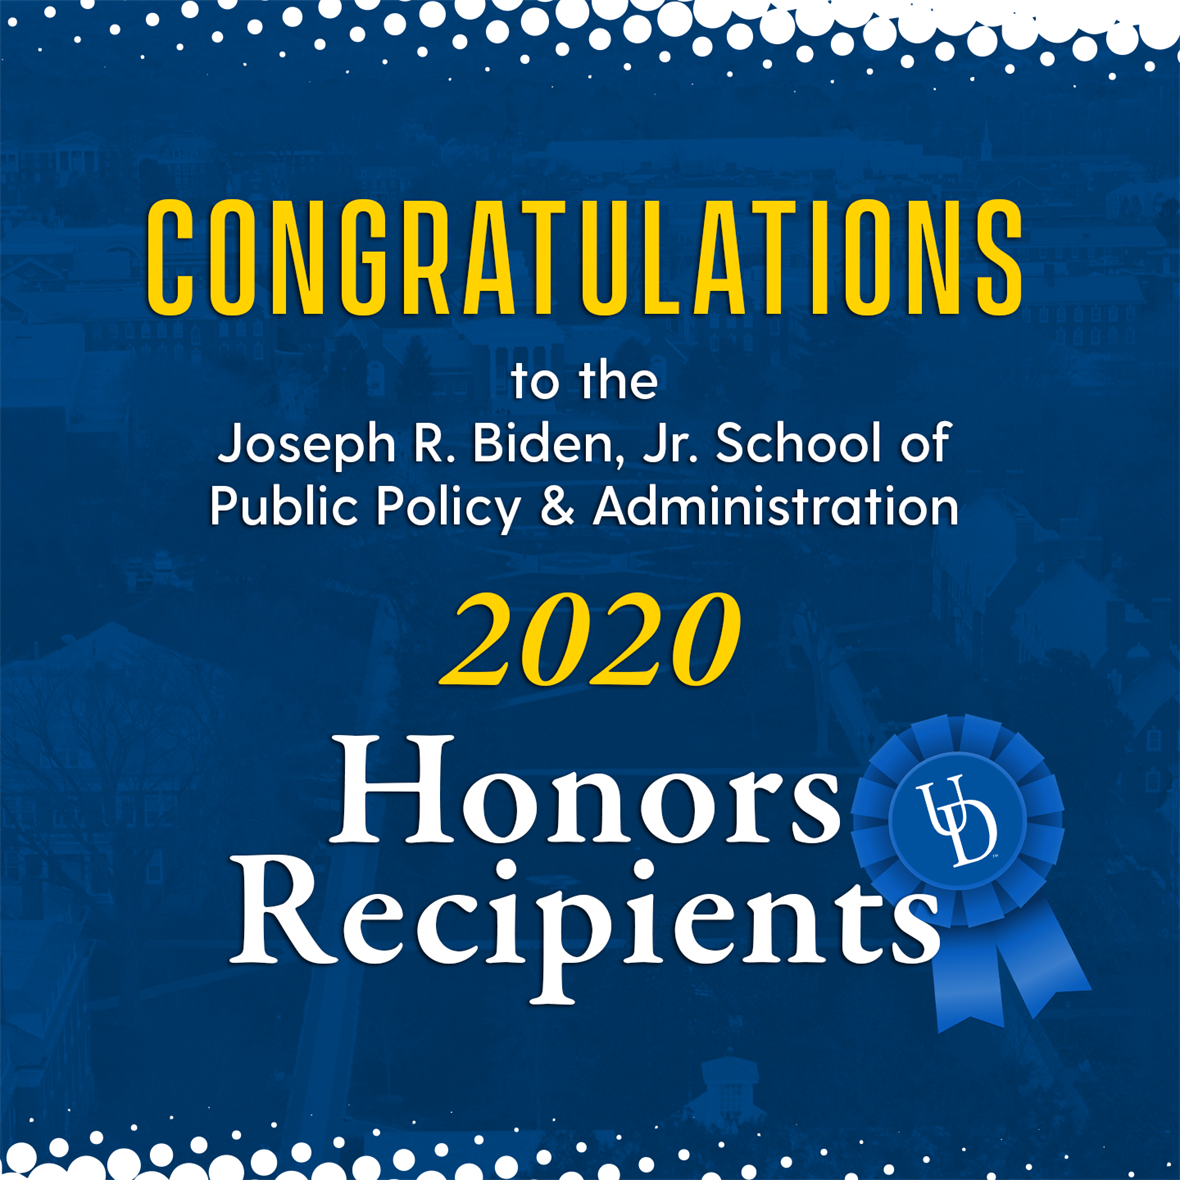 Congratulations to the Joseph R. Biden, Jr. School of Public Policy and Administration 2020 Honors Recipients